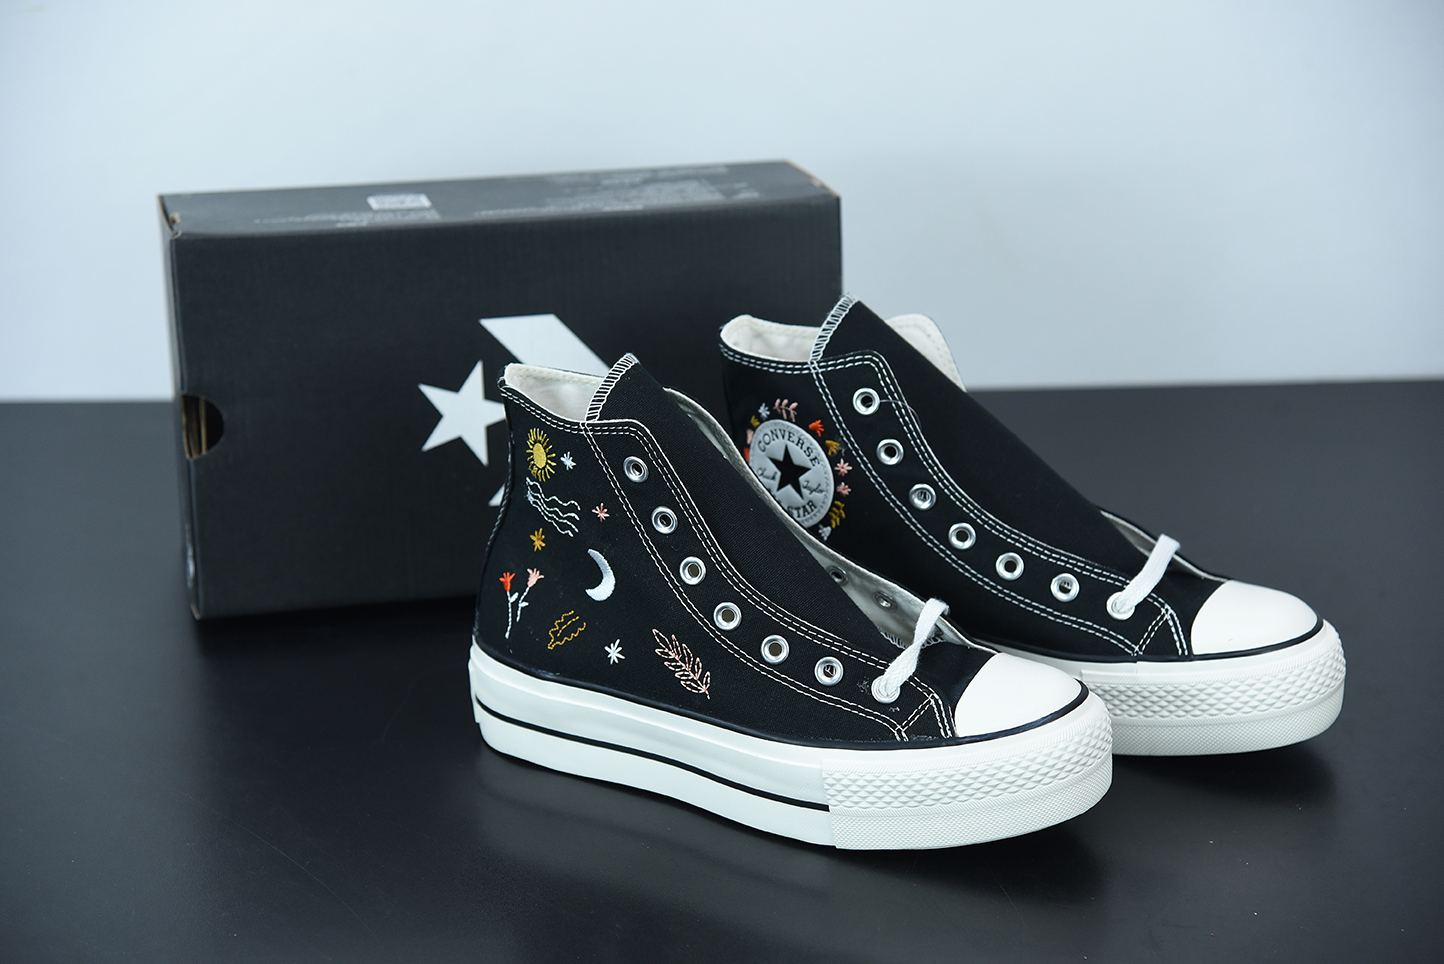 This Converse First String Chuck Taylor 1970 edition is built with premium